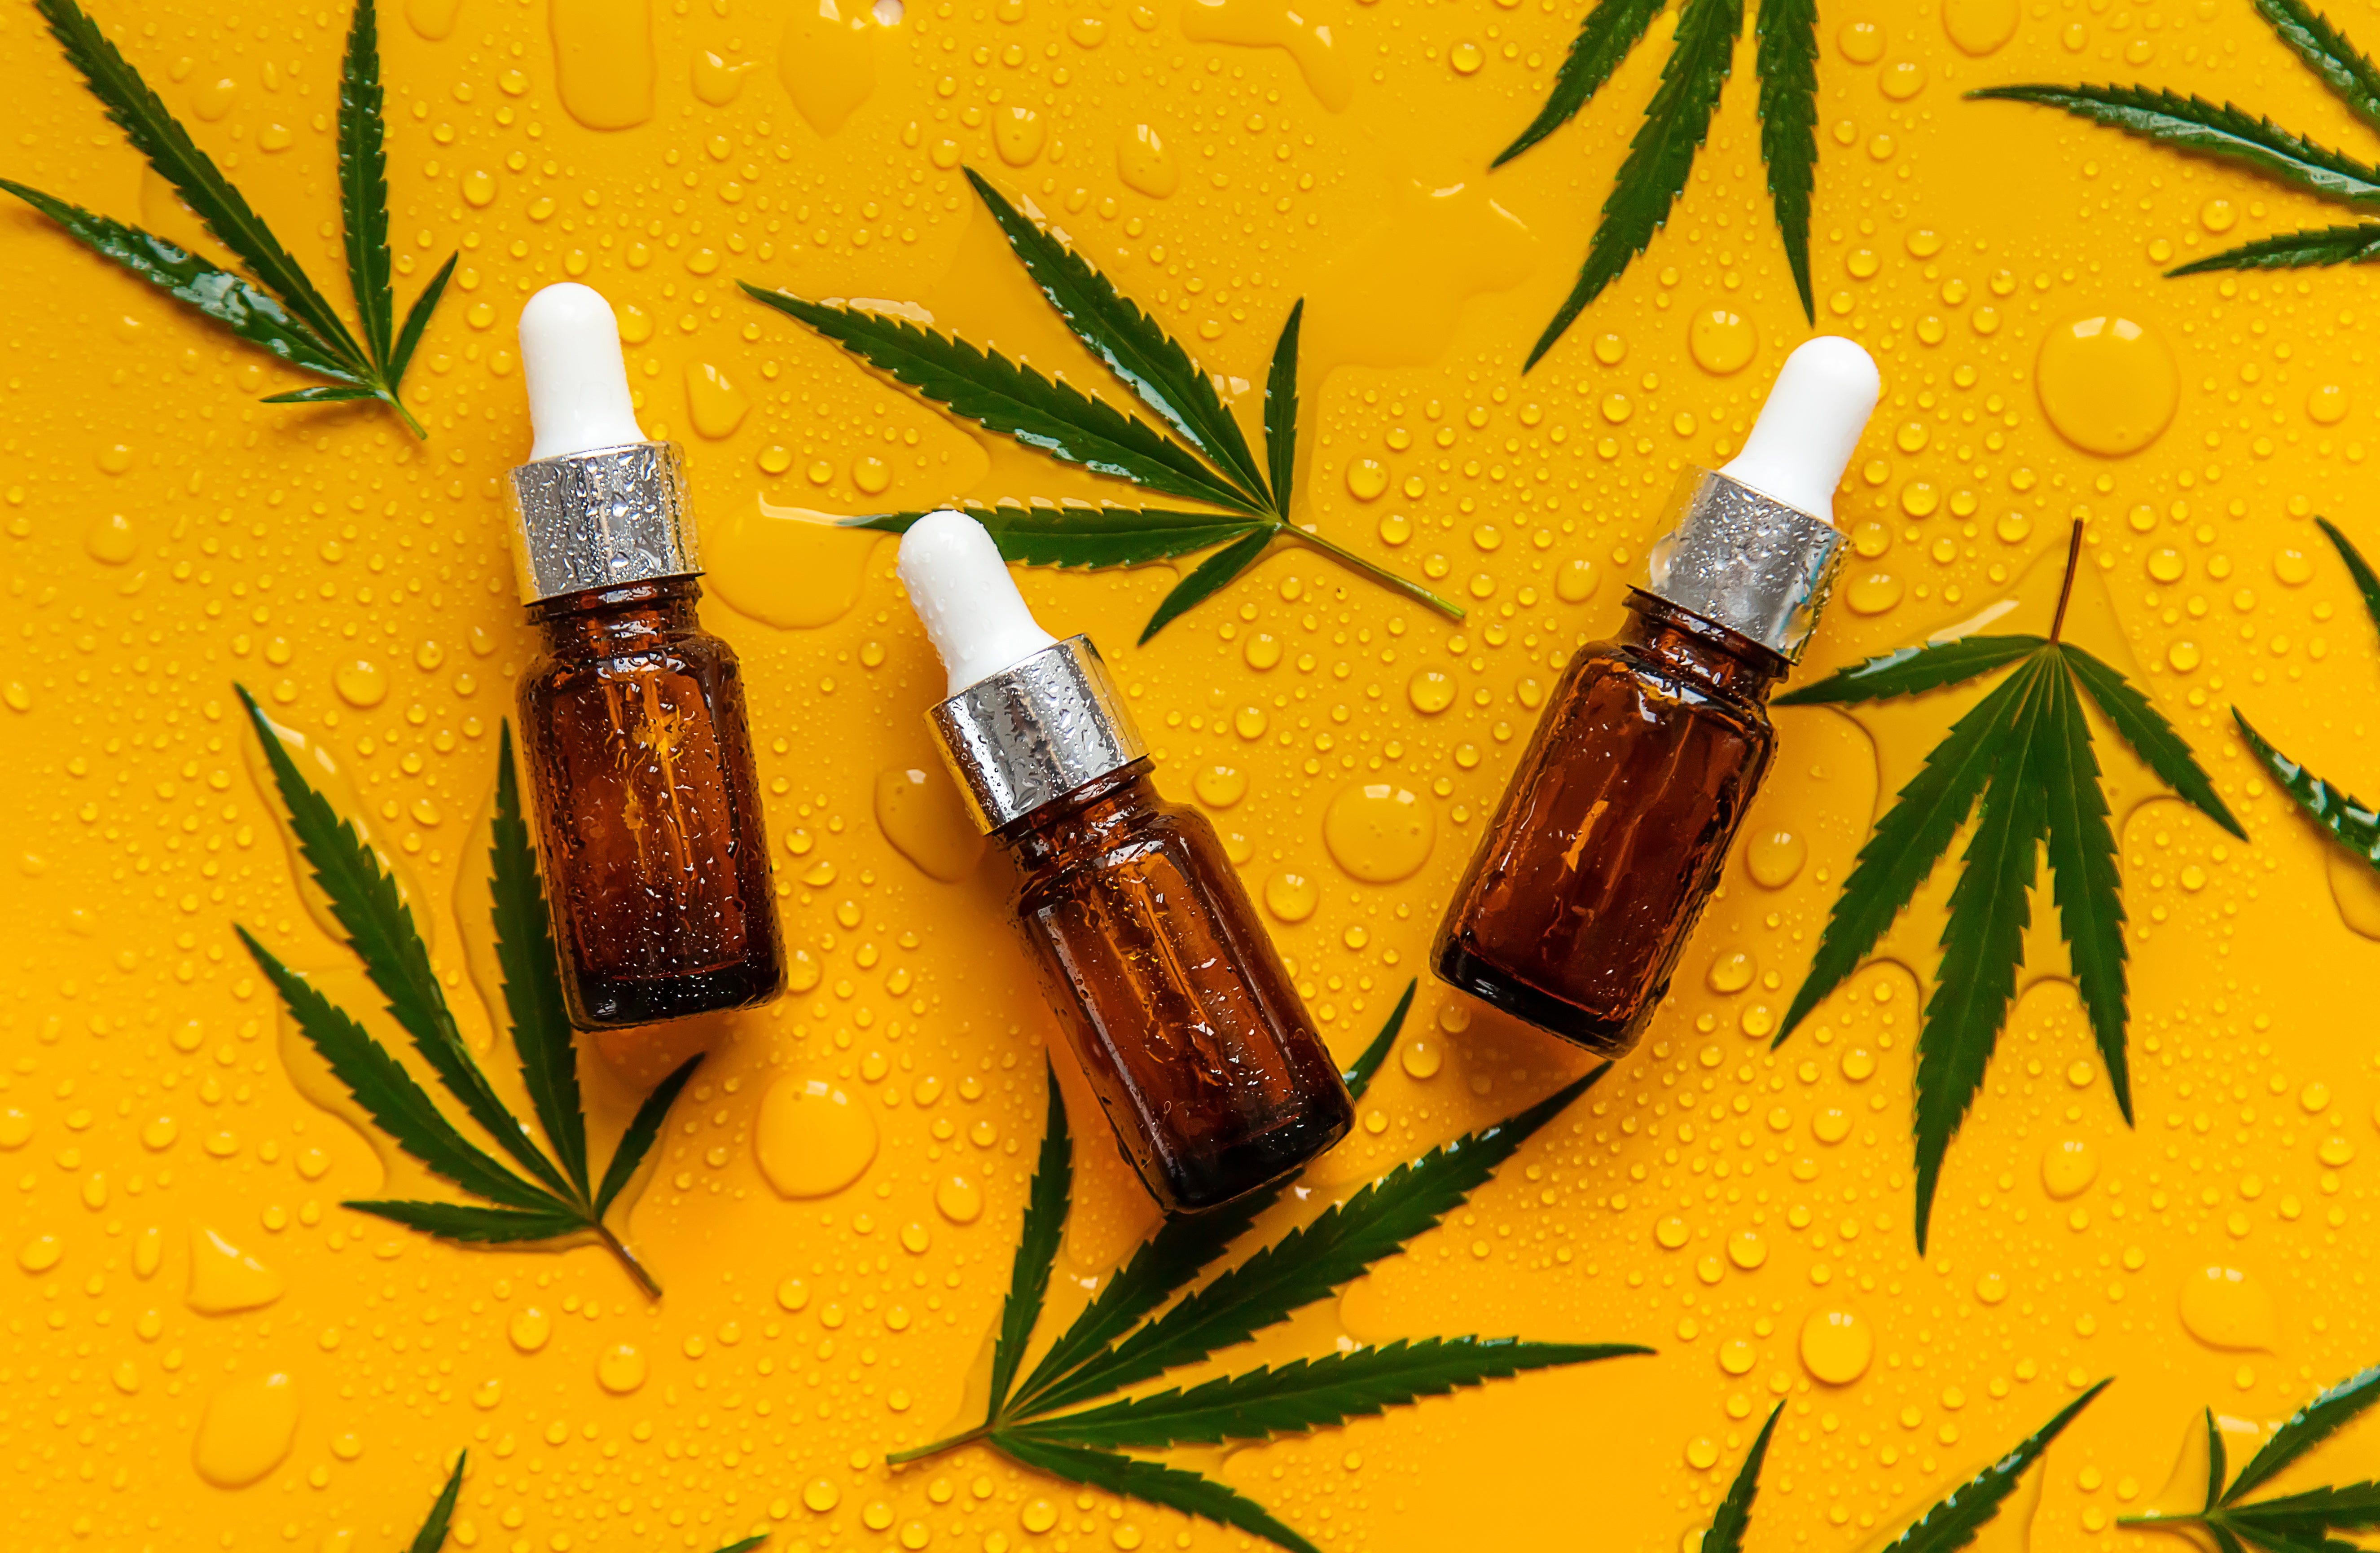 Three tinctures with cannabis-derived terpene THC oil lie next to cannabis flower leaves on a yellow surface.